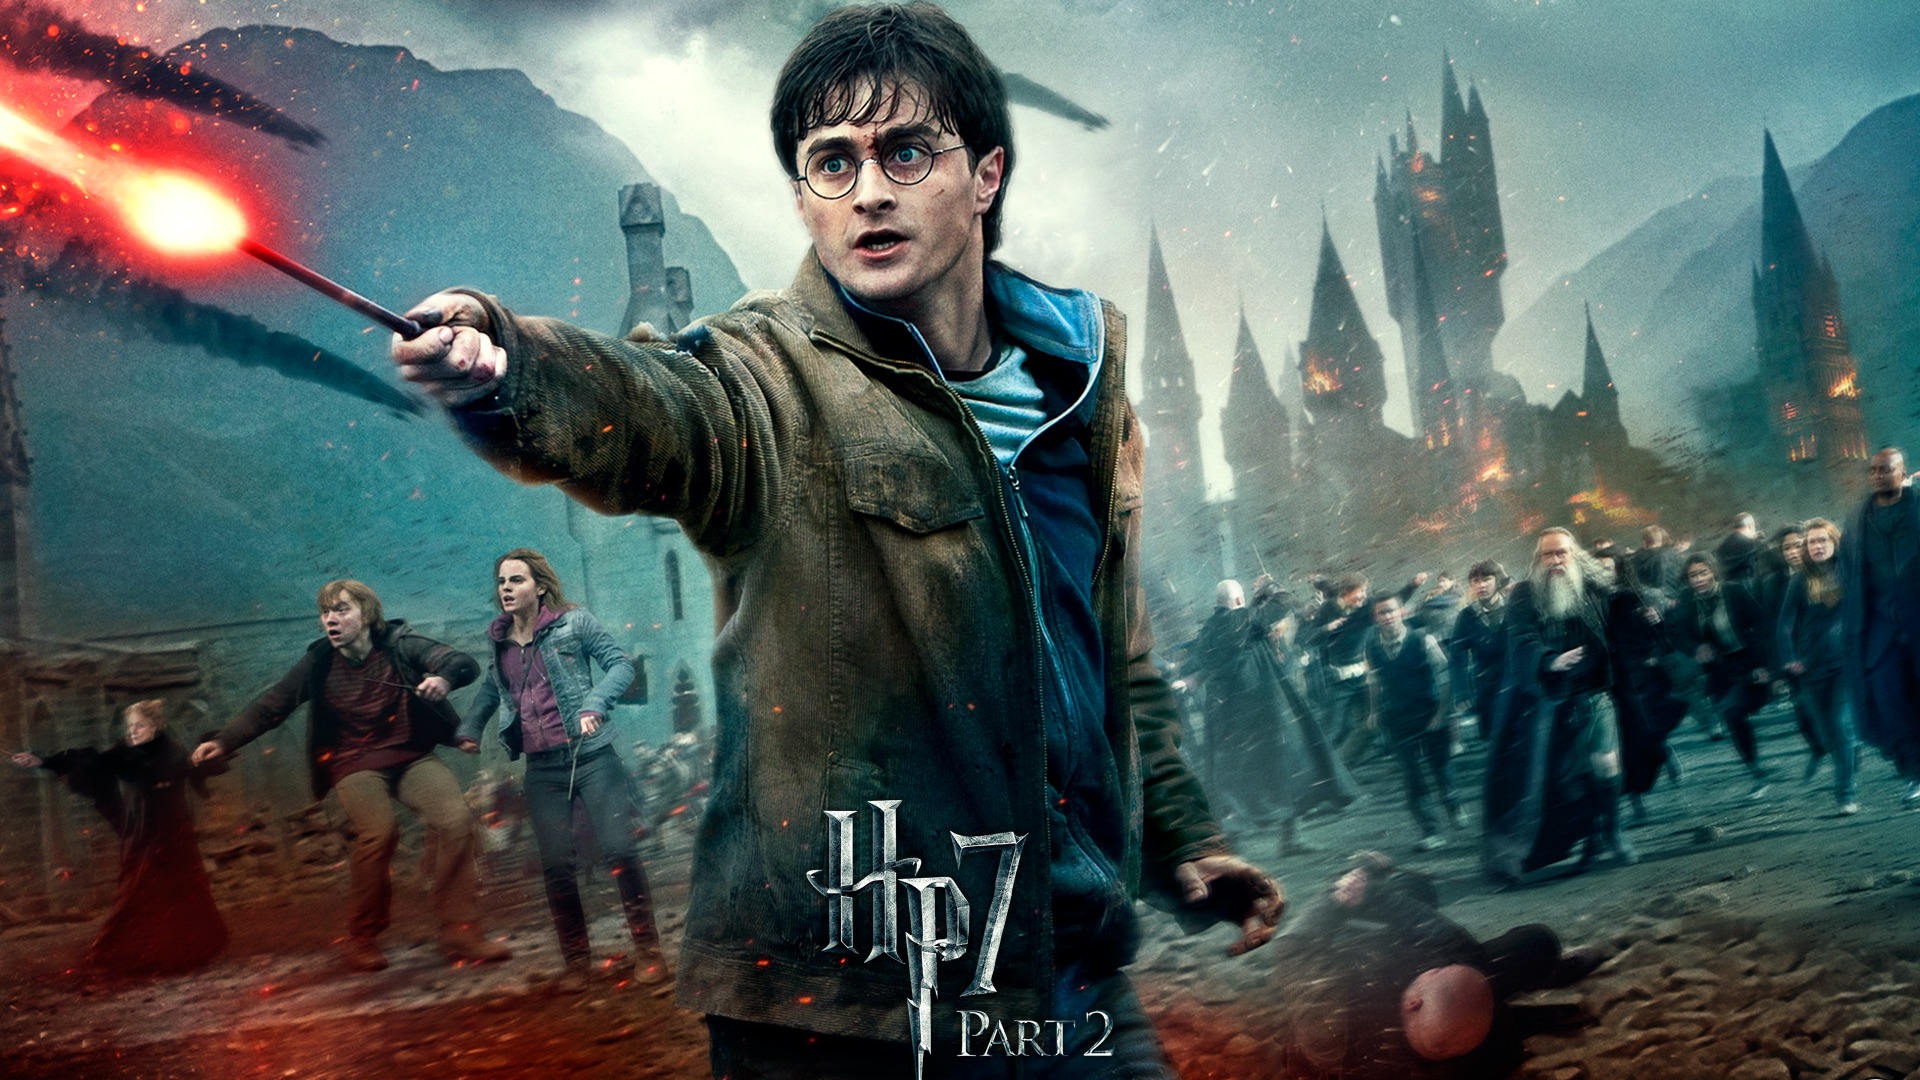 Harry Potter and the Deathly Hallows 哈利·波特与死亡圣器 高清壁纸20 - 1920x1080